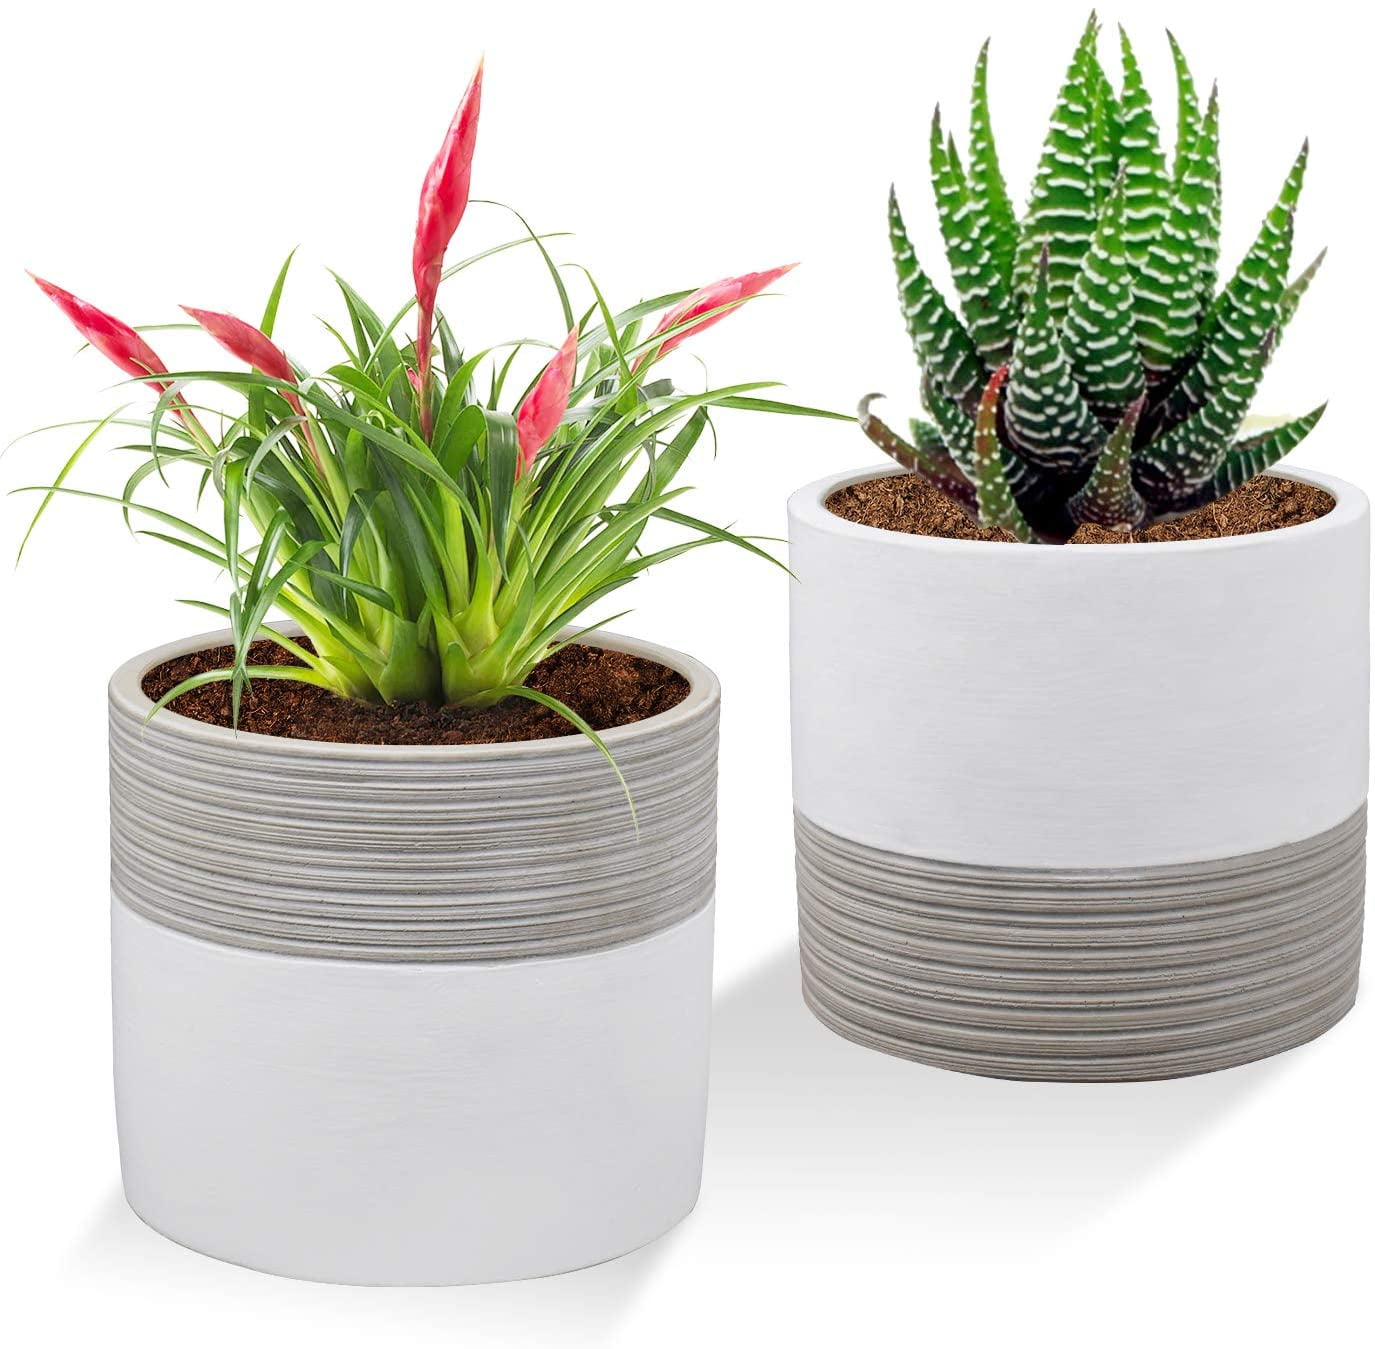 5 Inch Concrete Succulent Flowerpot Bonsai Container with Drainage Holes Cement Planters Pots for Plants Indoor POTEY 054902, Set of 2, Plant NOT Included 